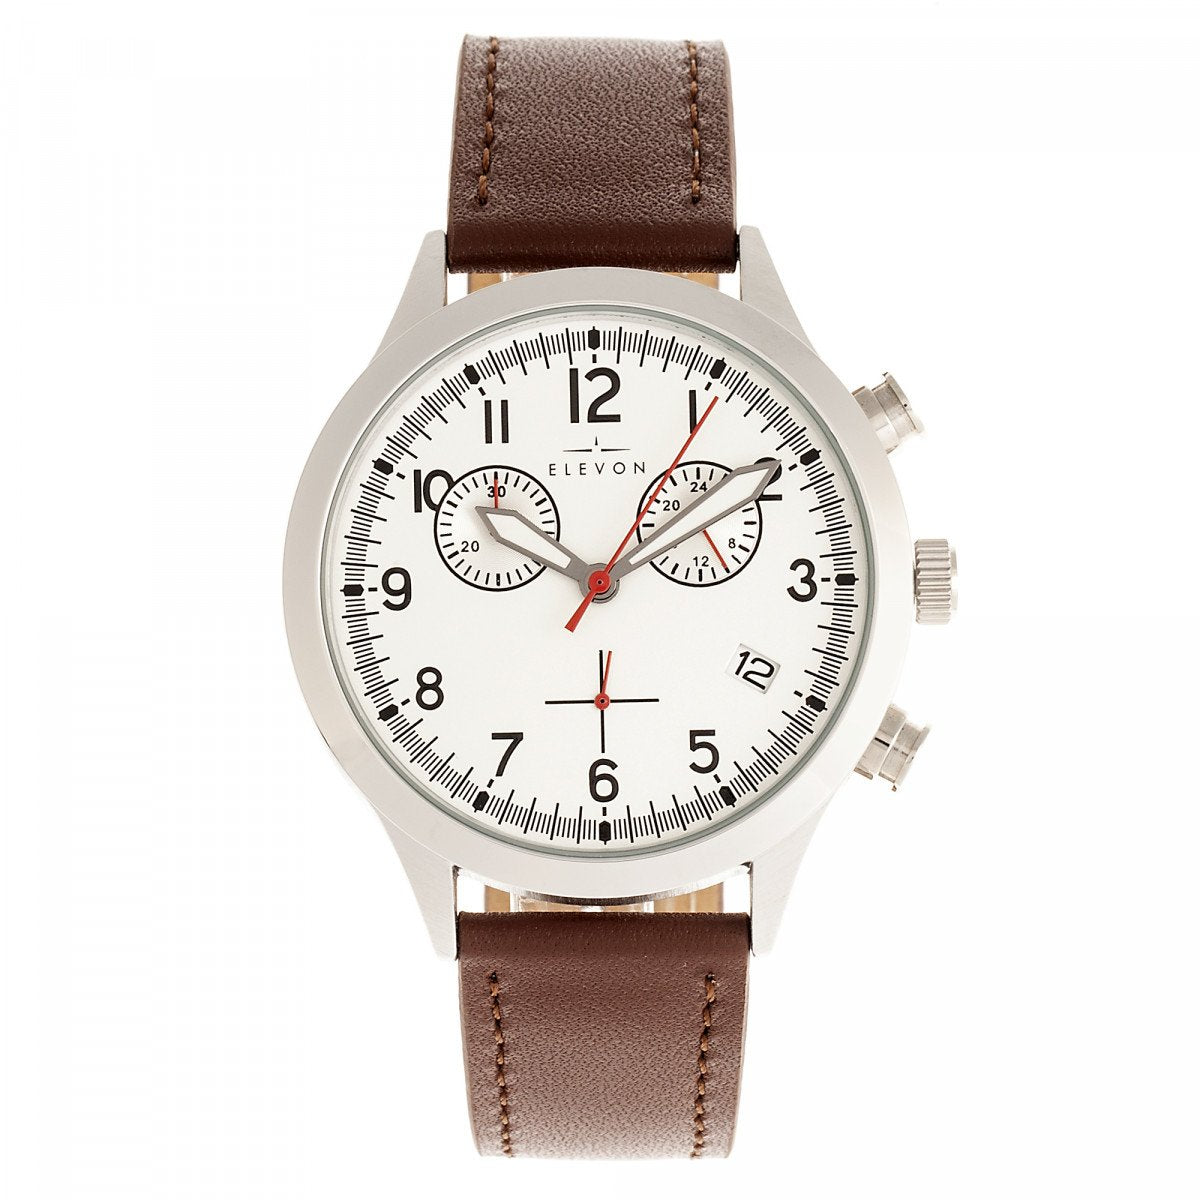 Elevon Antoine Chronograph Leather-Band Watch w/Date - Brown/Silver - ELE113-2